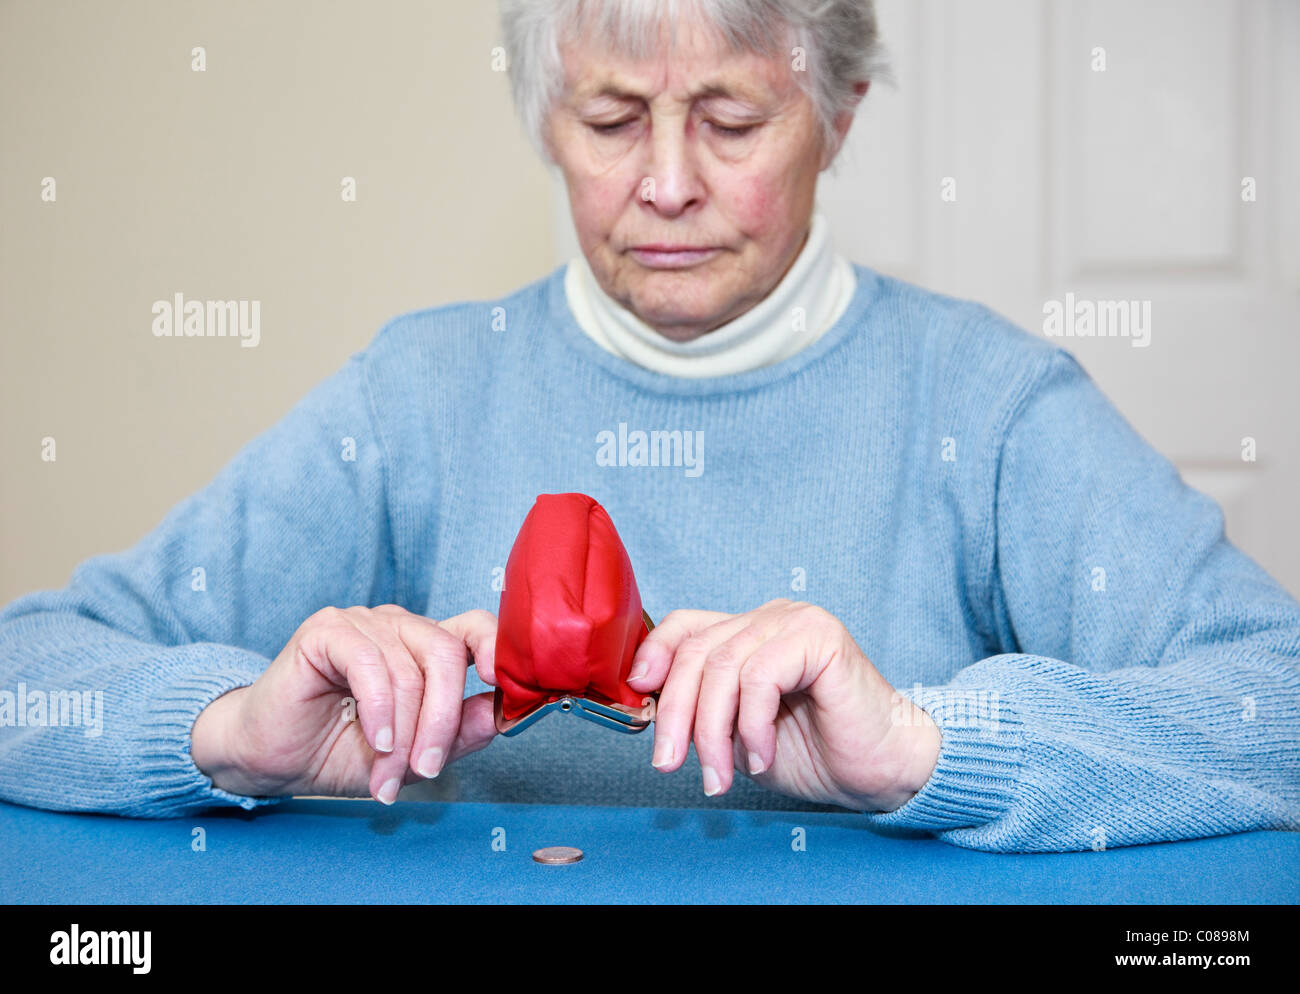 Poor senior elderly woman pensioner with no money and a worried expression emptying a penny coin out of an open purse in age of austerity. England UK Stock Photo